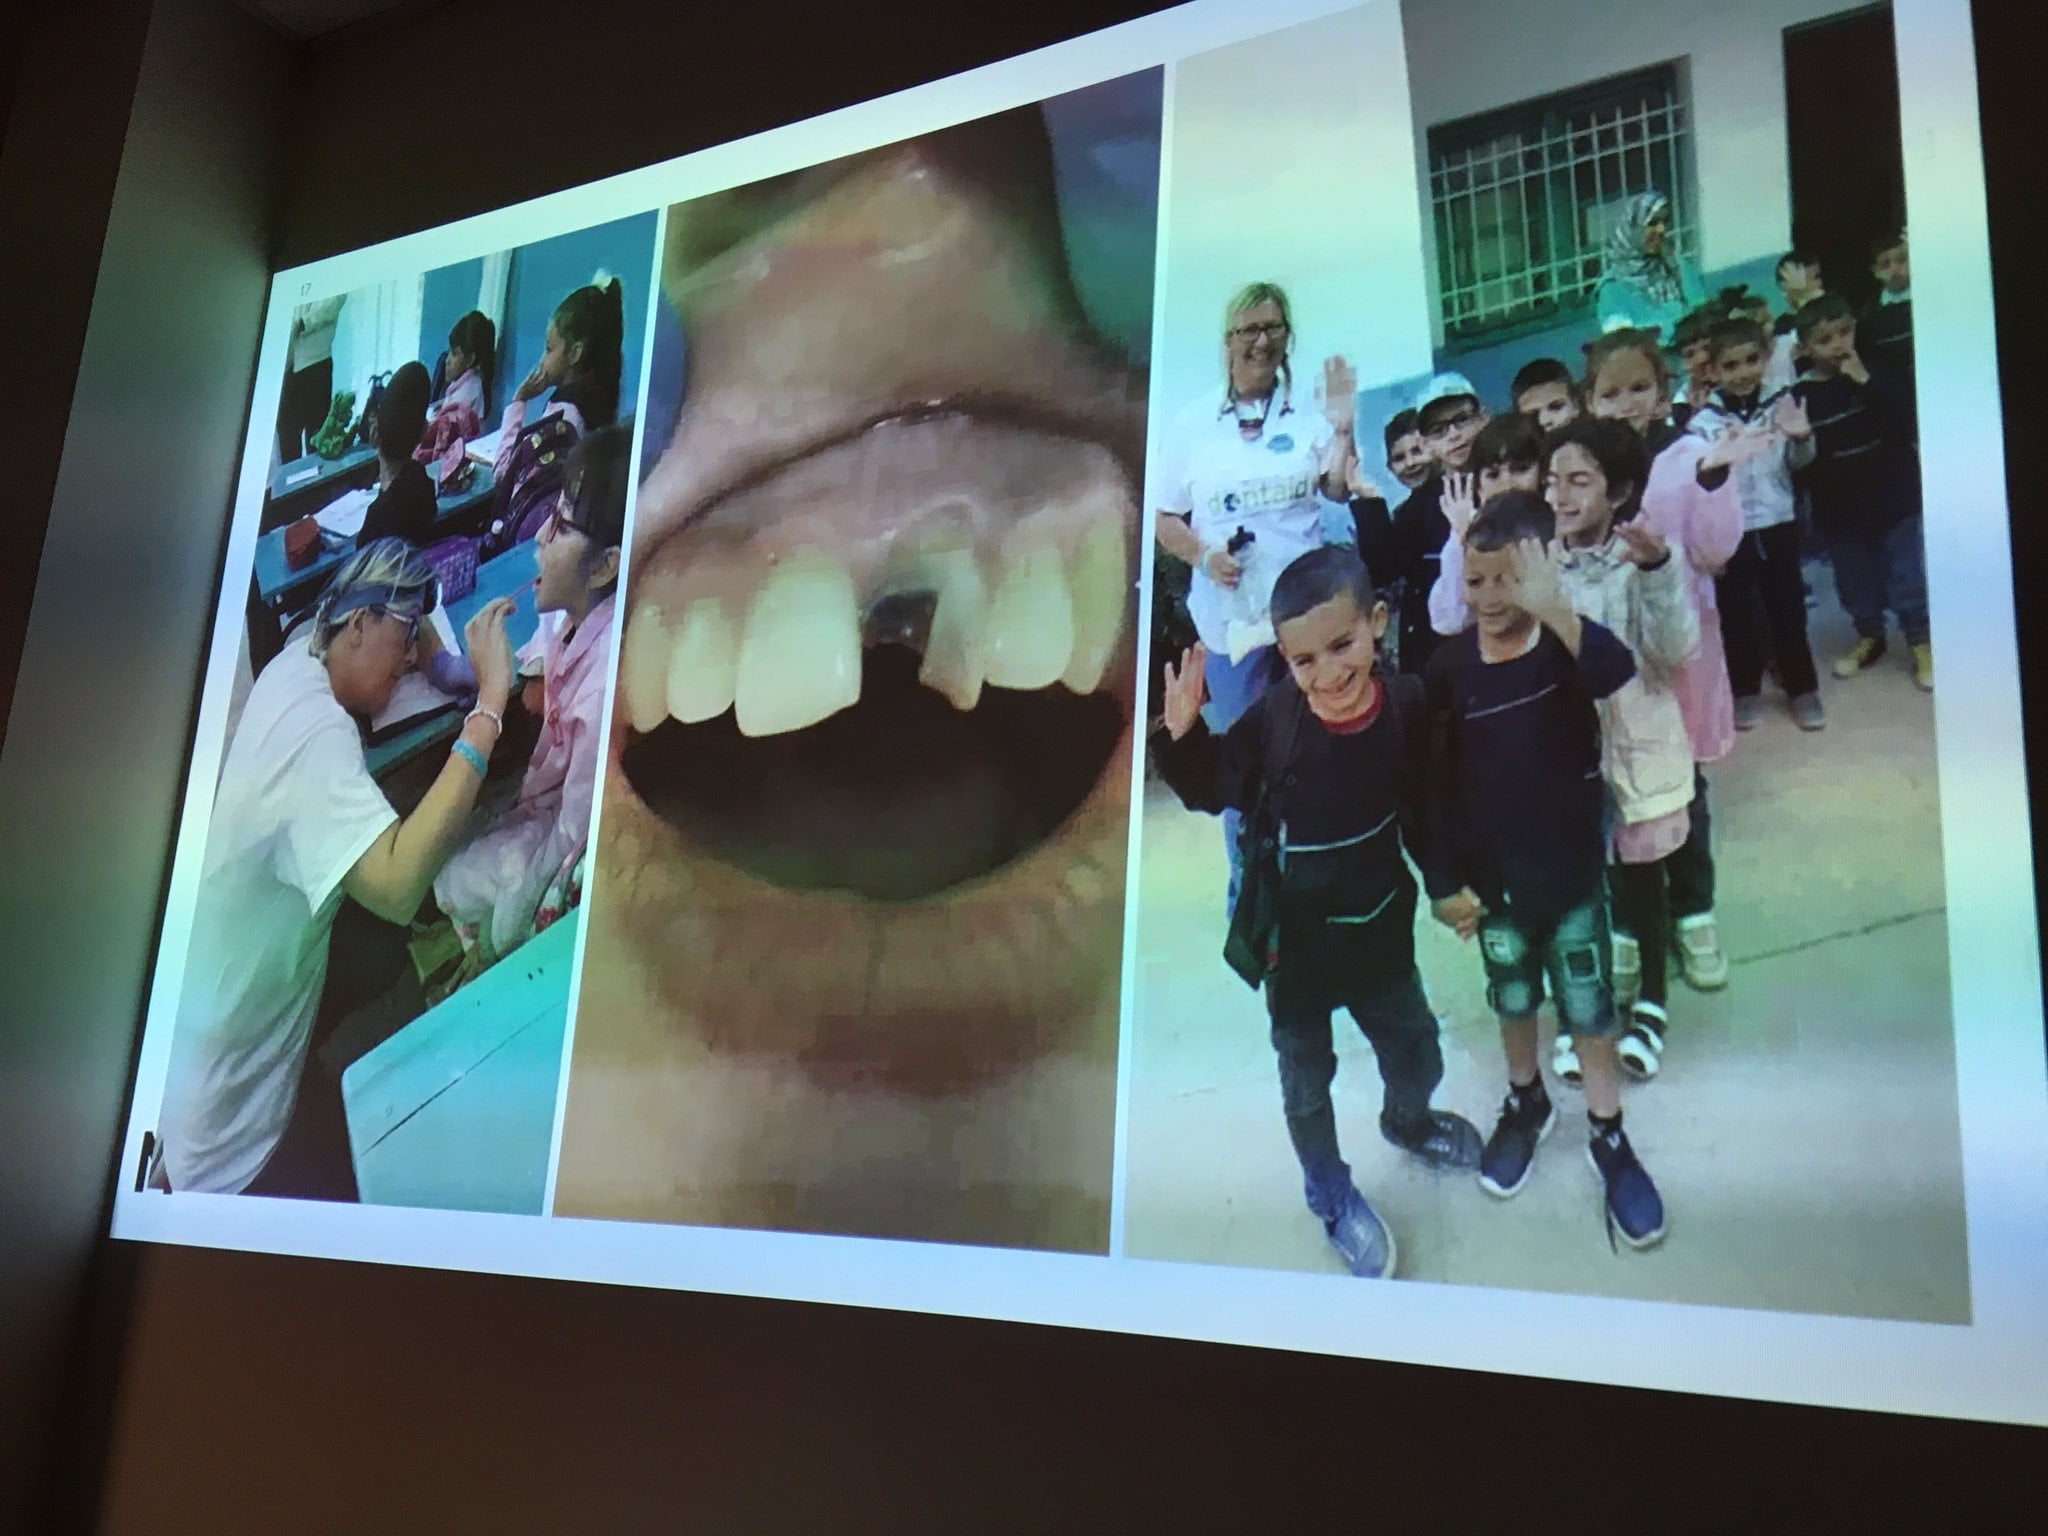 Photos of Dentaid volunteering trip to Morocco by West Country Dental Care dental nurse